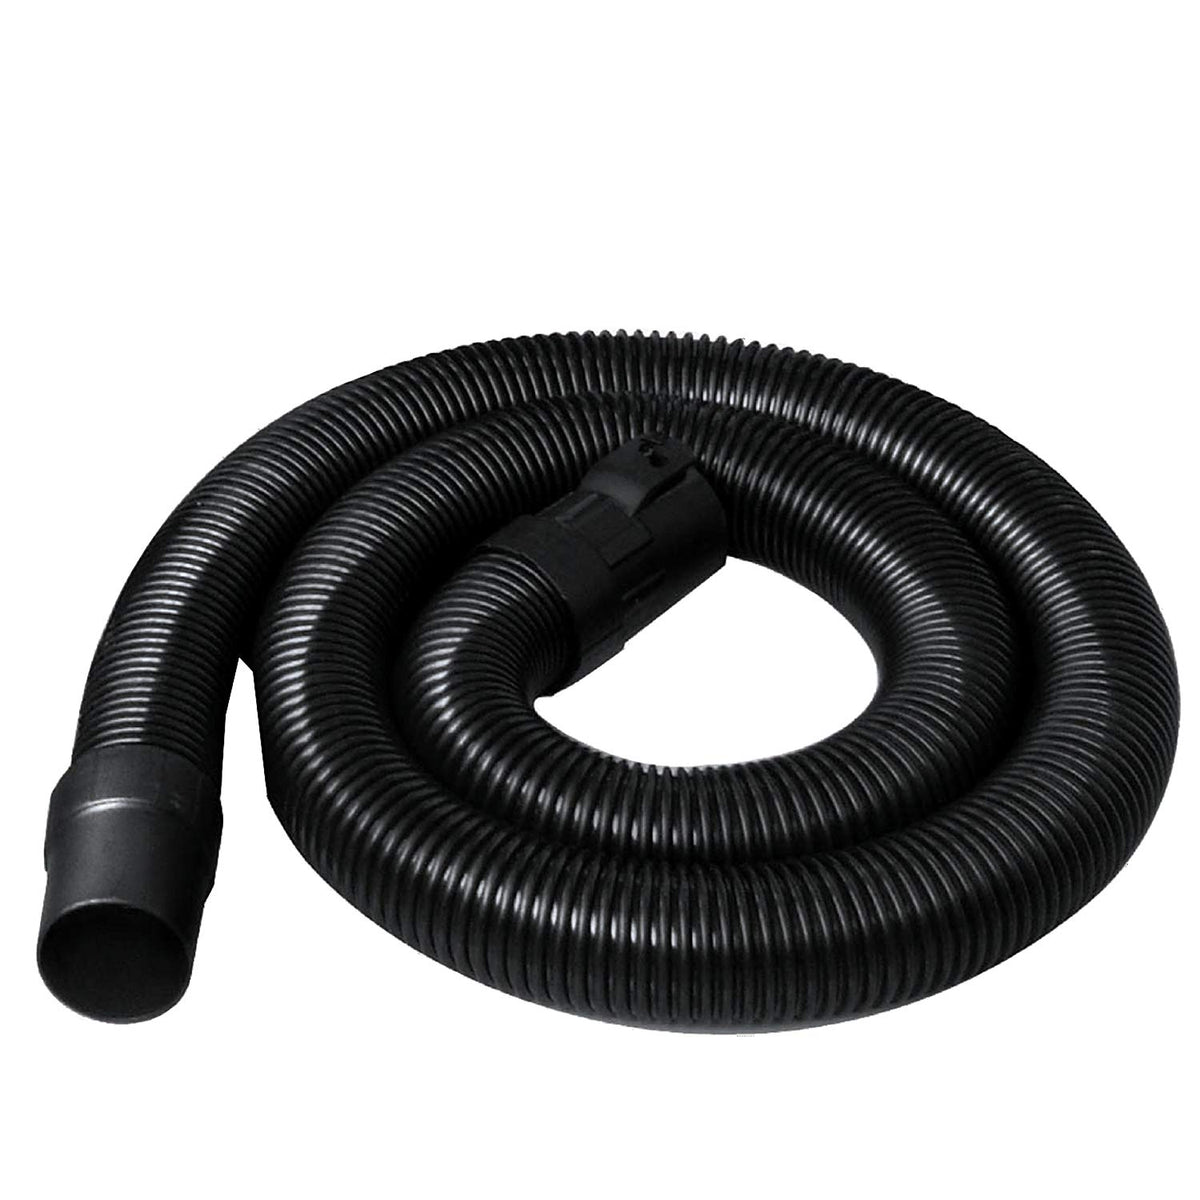 Vacmaster V2H7 Universal Fit Hose with Adapters, 7', 2-1/2"